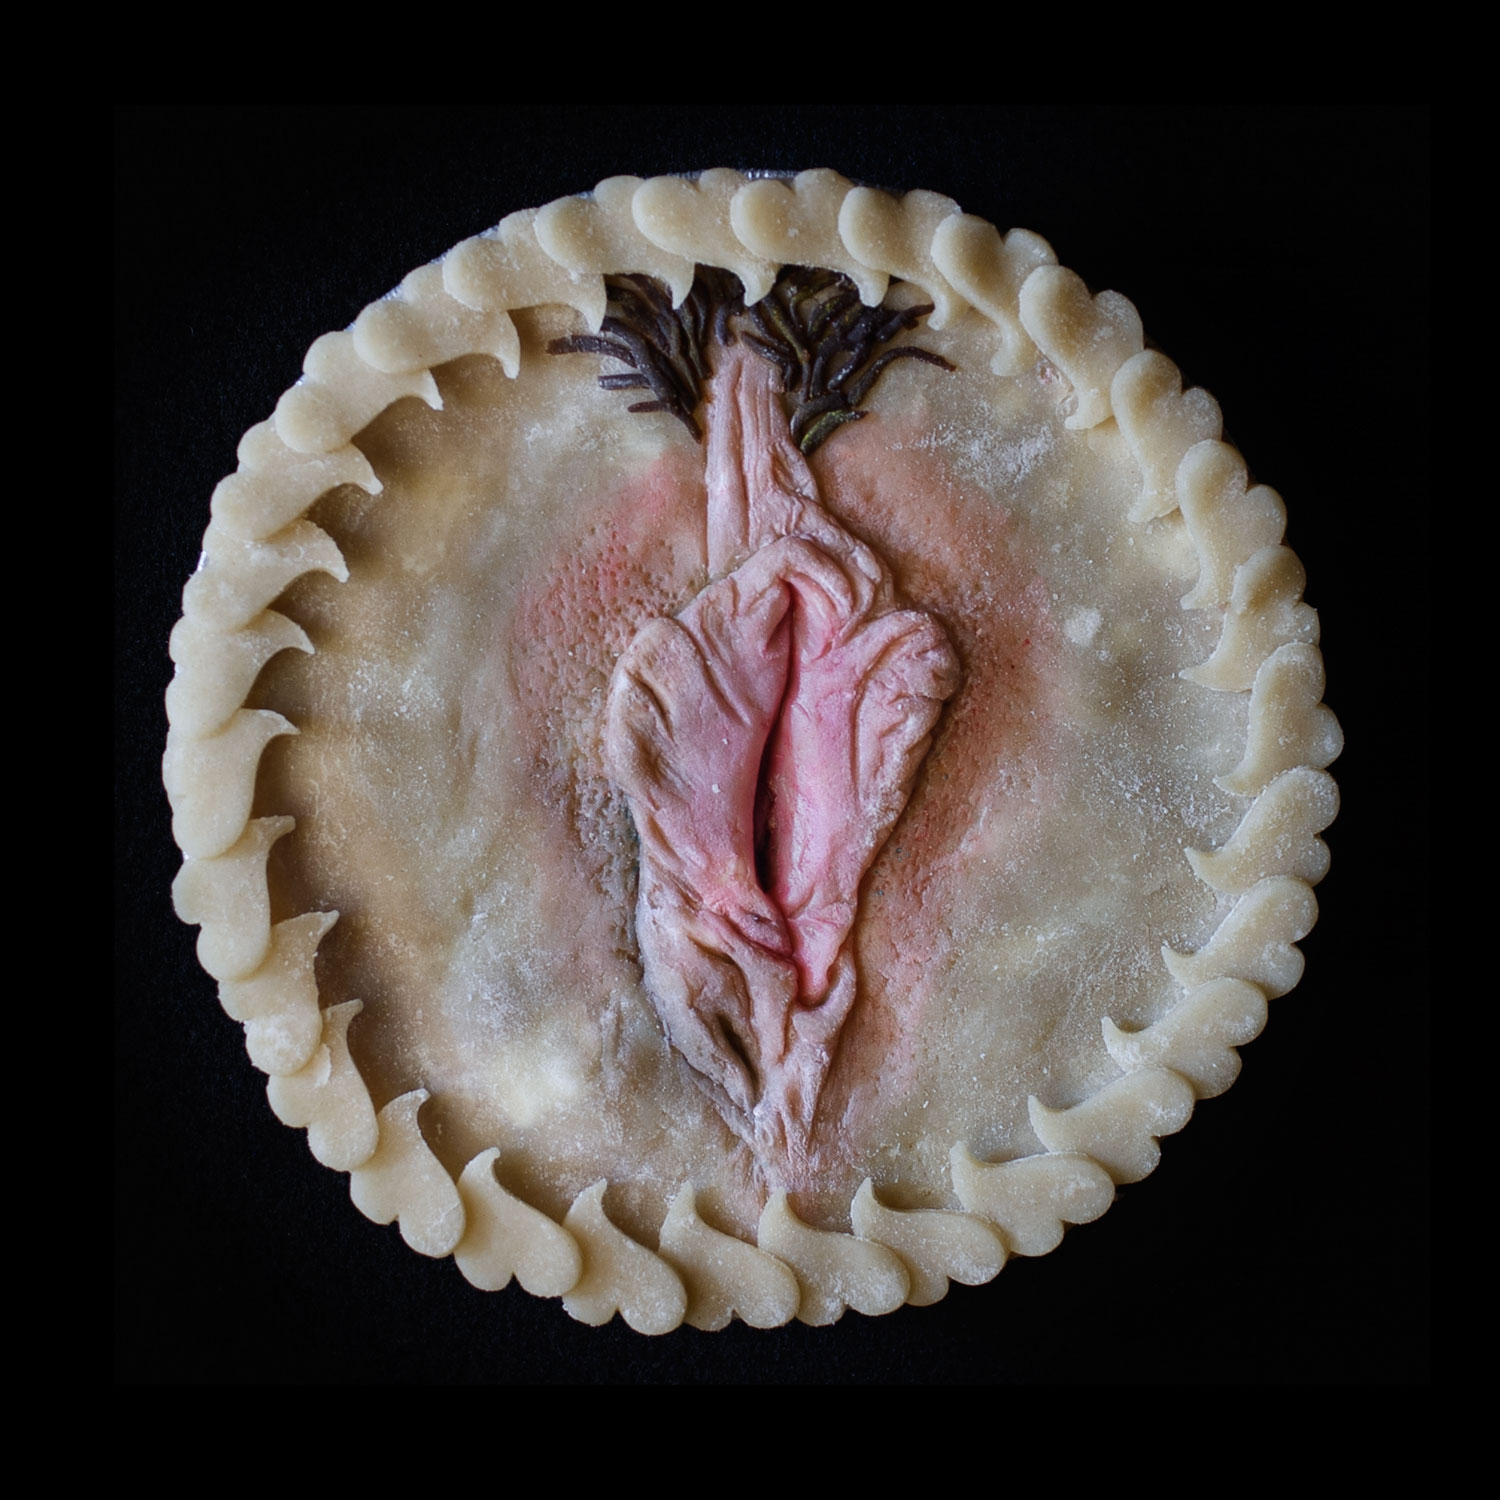 A pie on a black background. The pie is adorned with a realistic vulva surrounded my hearts cut out of pie dough. 